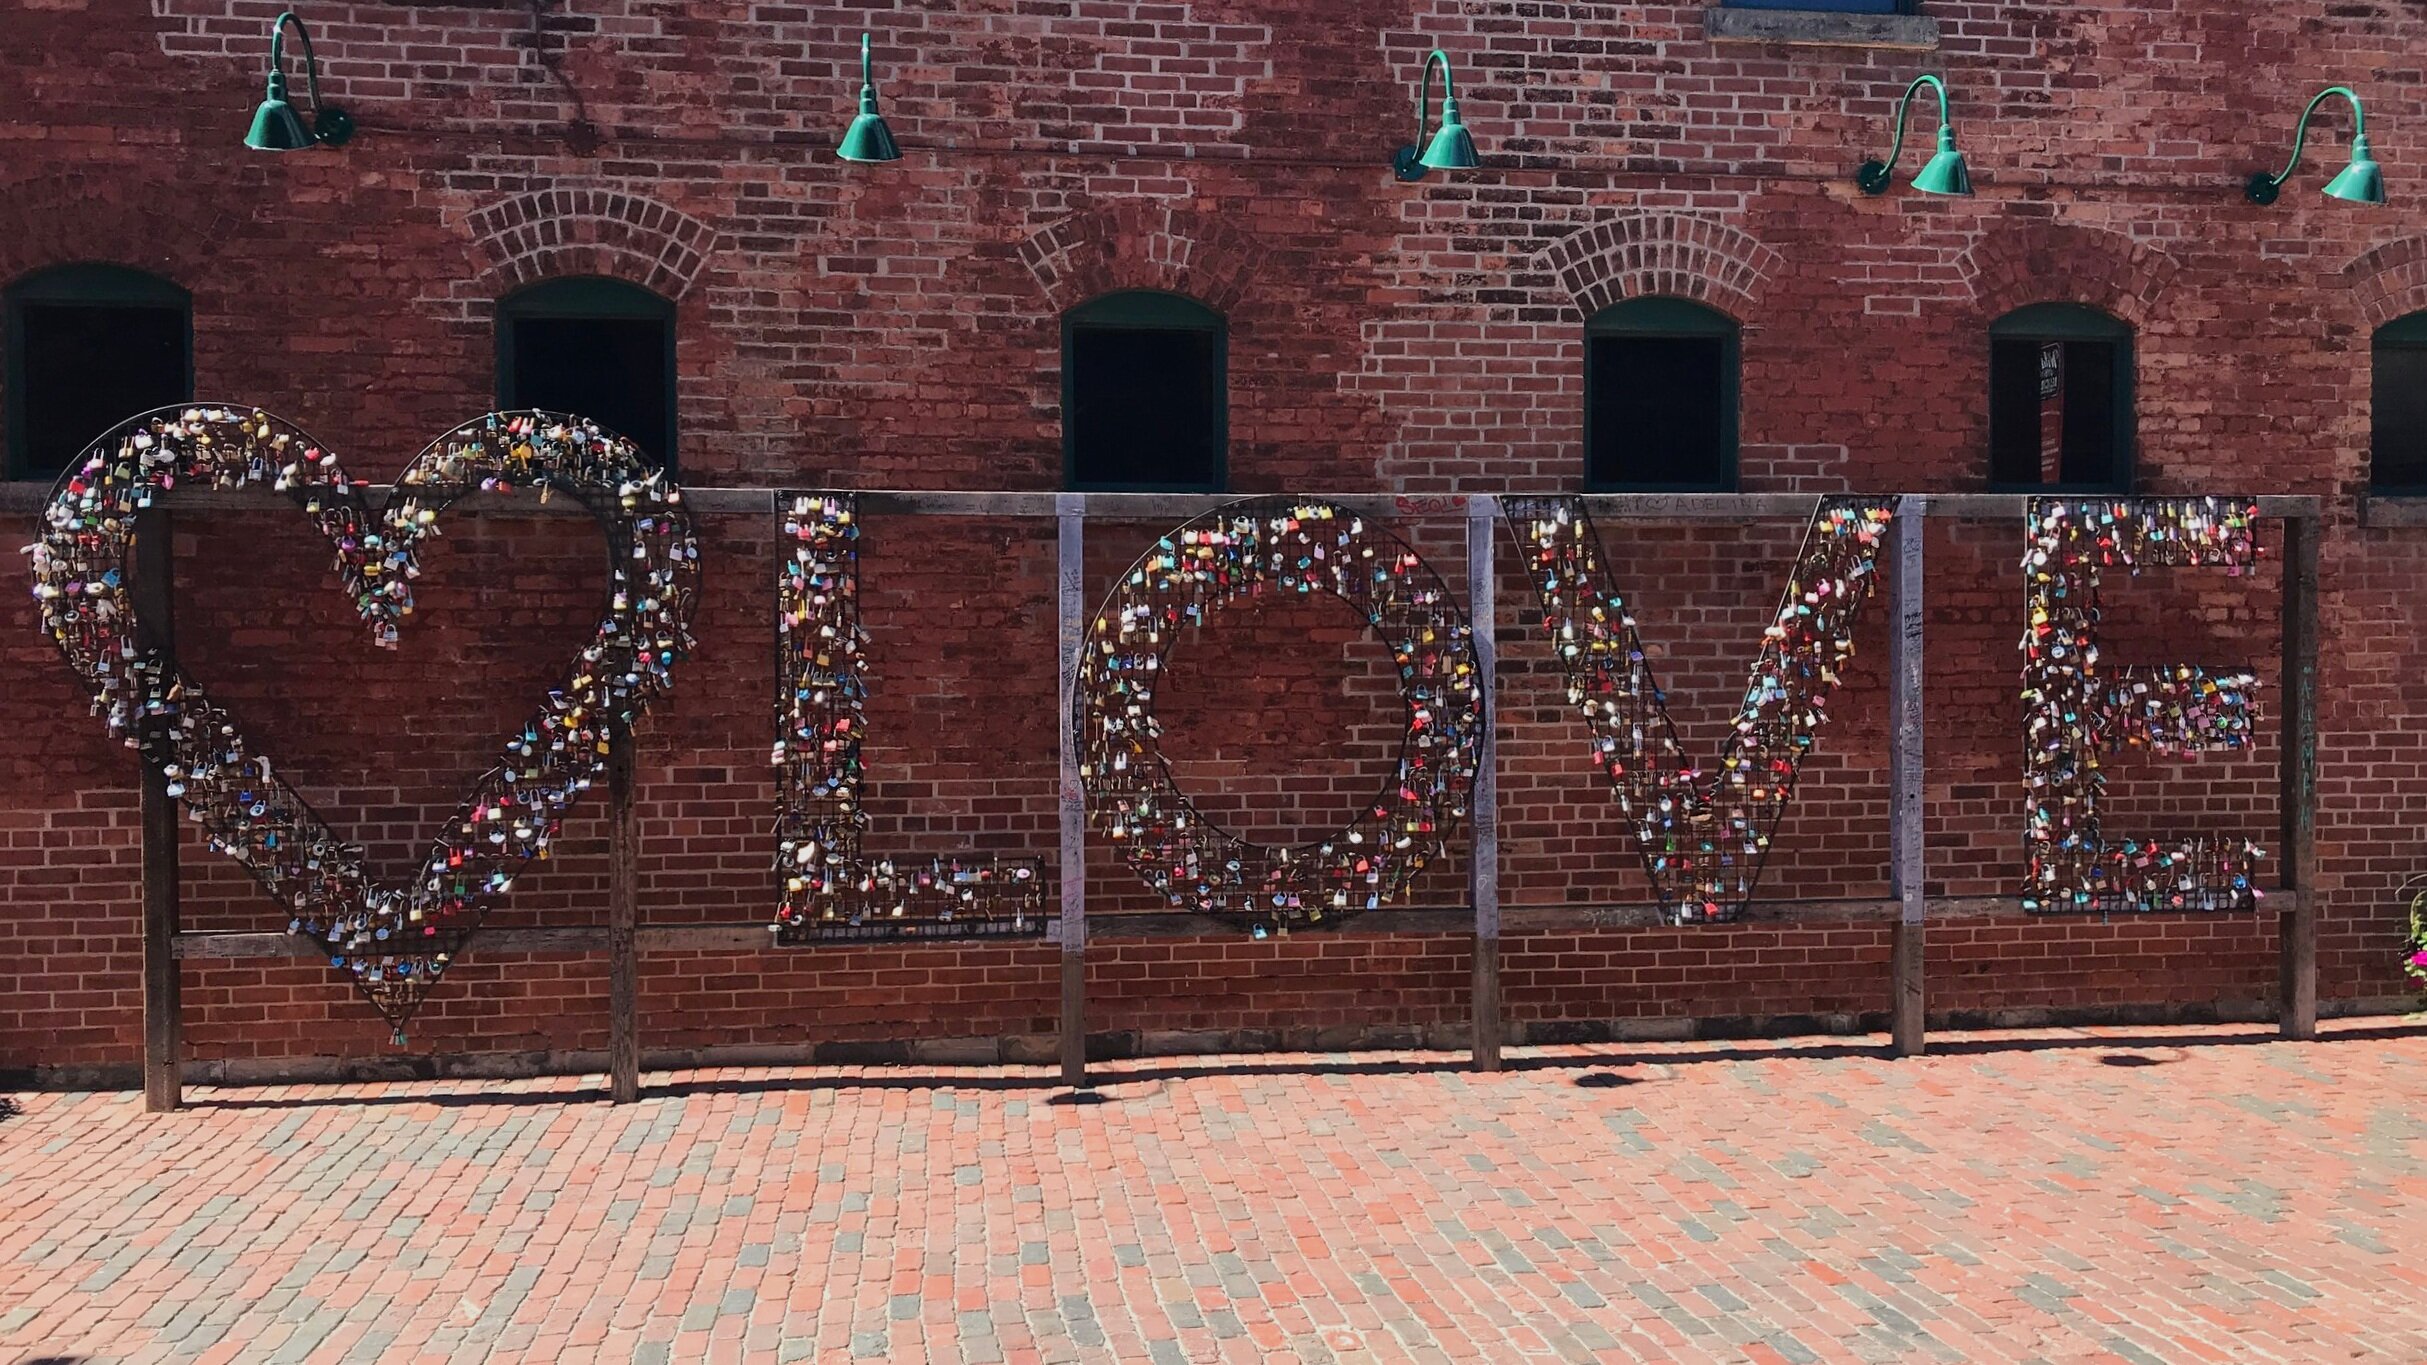 The Love lock in the Distillery district is a fun public art display in Toronto, Canada